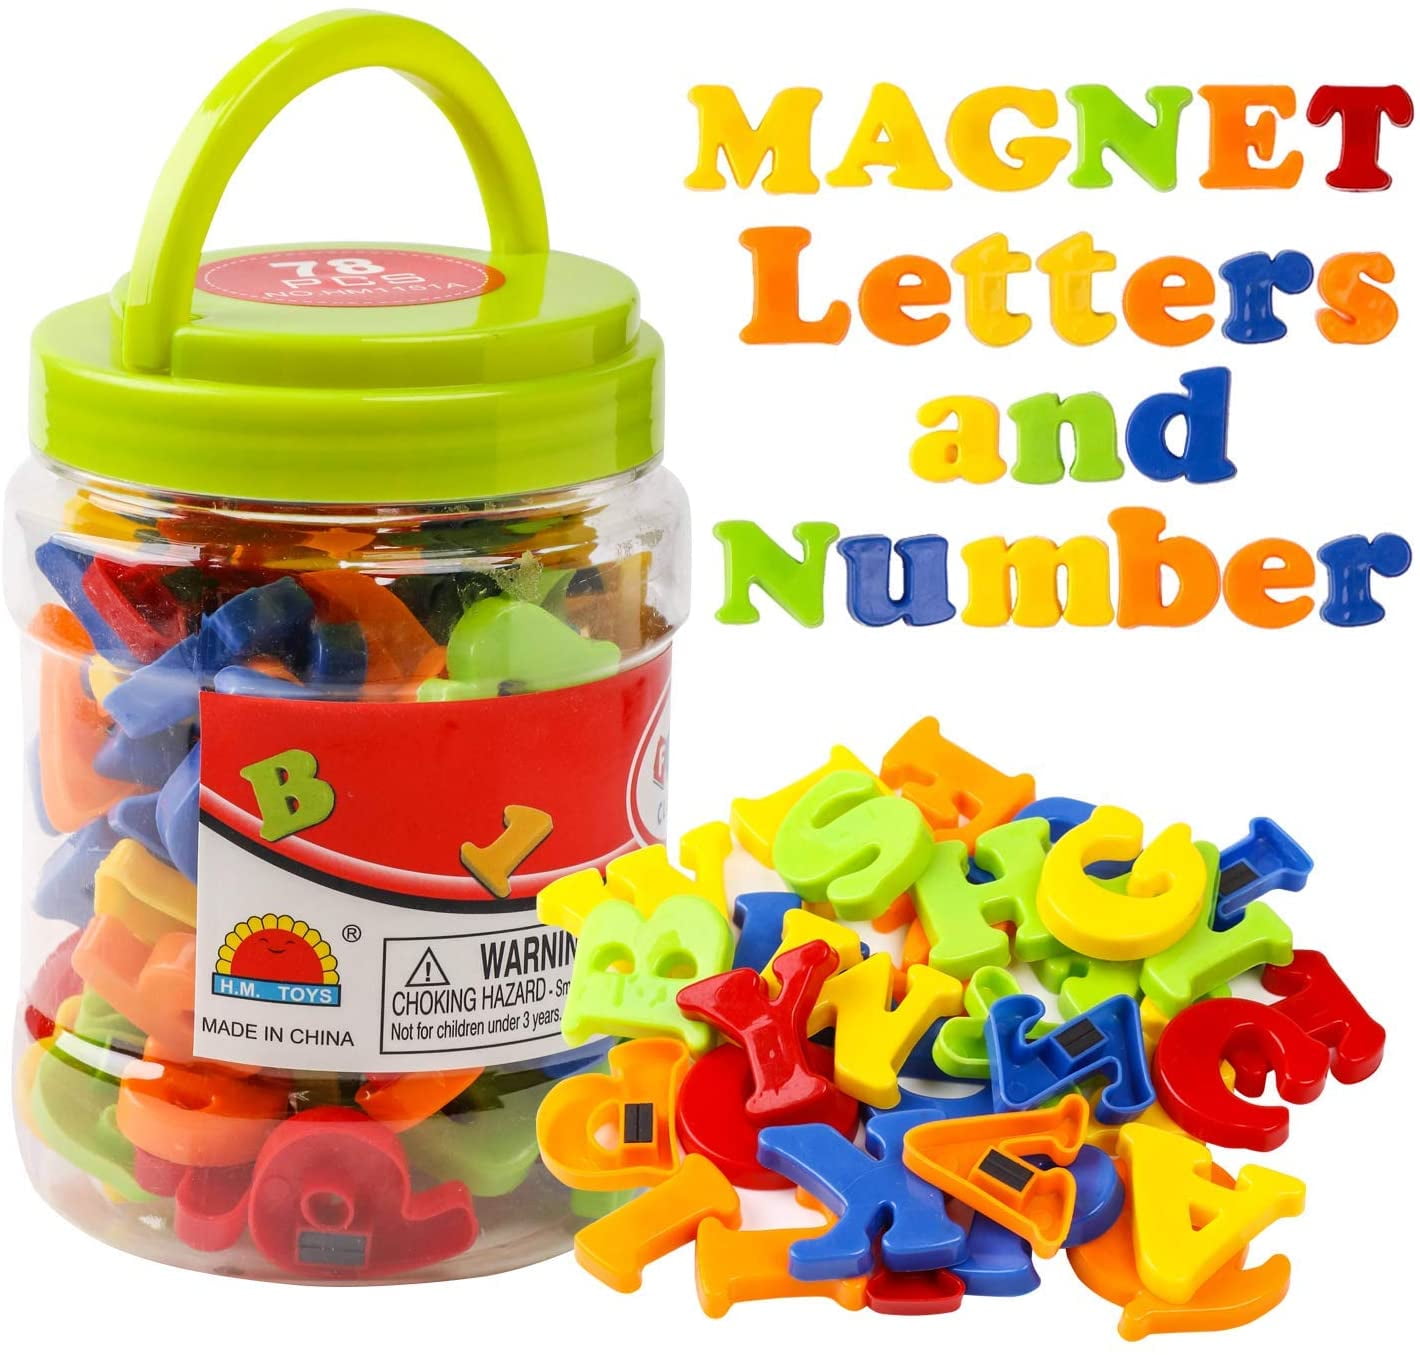 Magnetic Letters Childrens Alphabet Magnets In UPPER Case Learning Toys 2021 